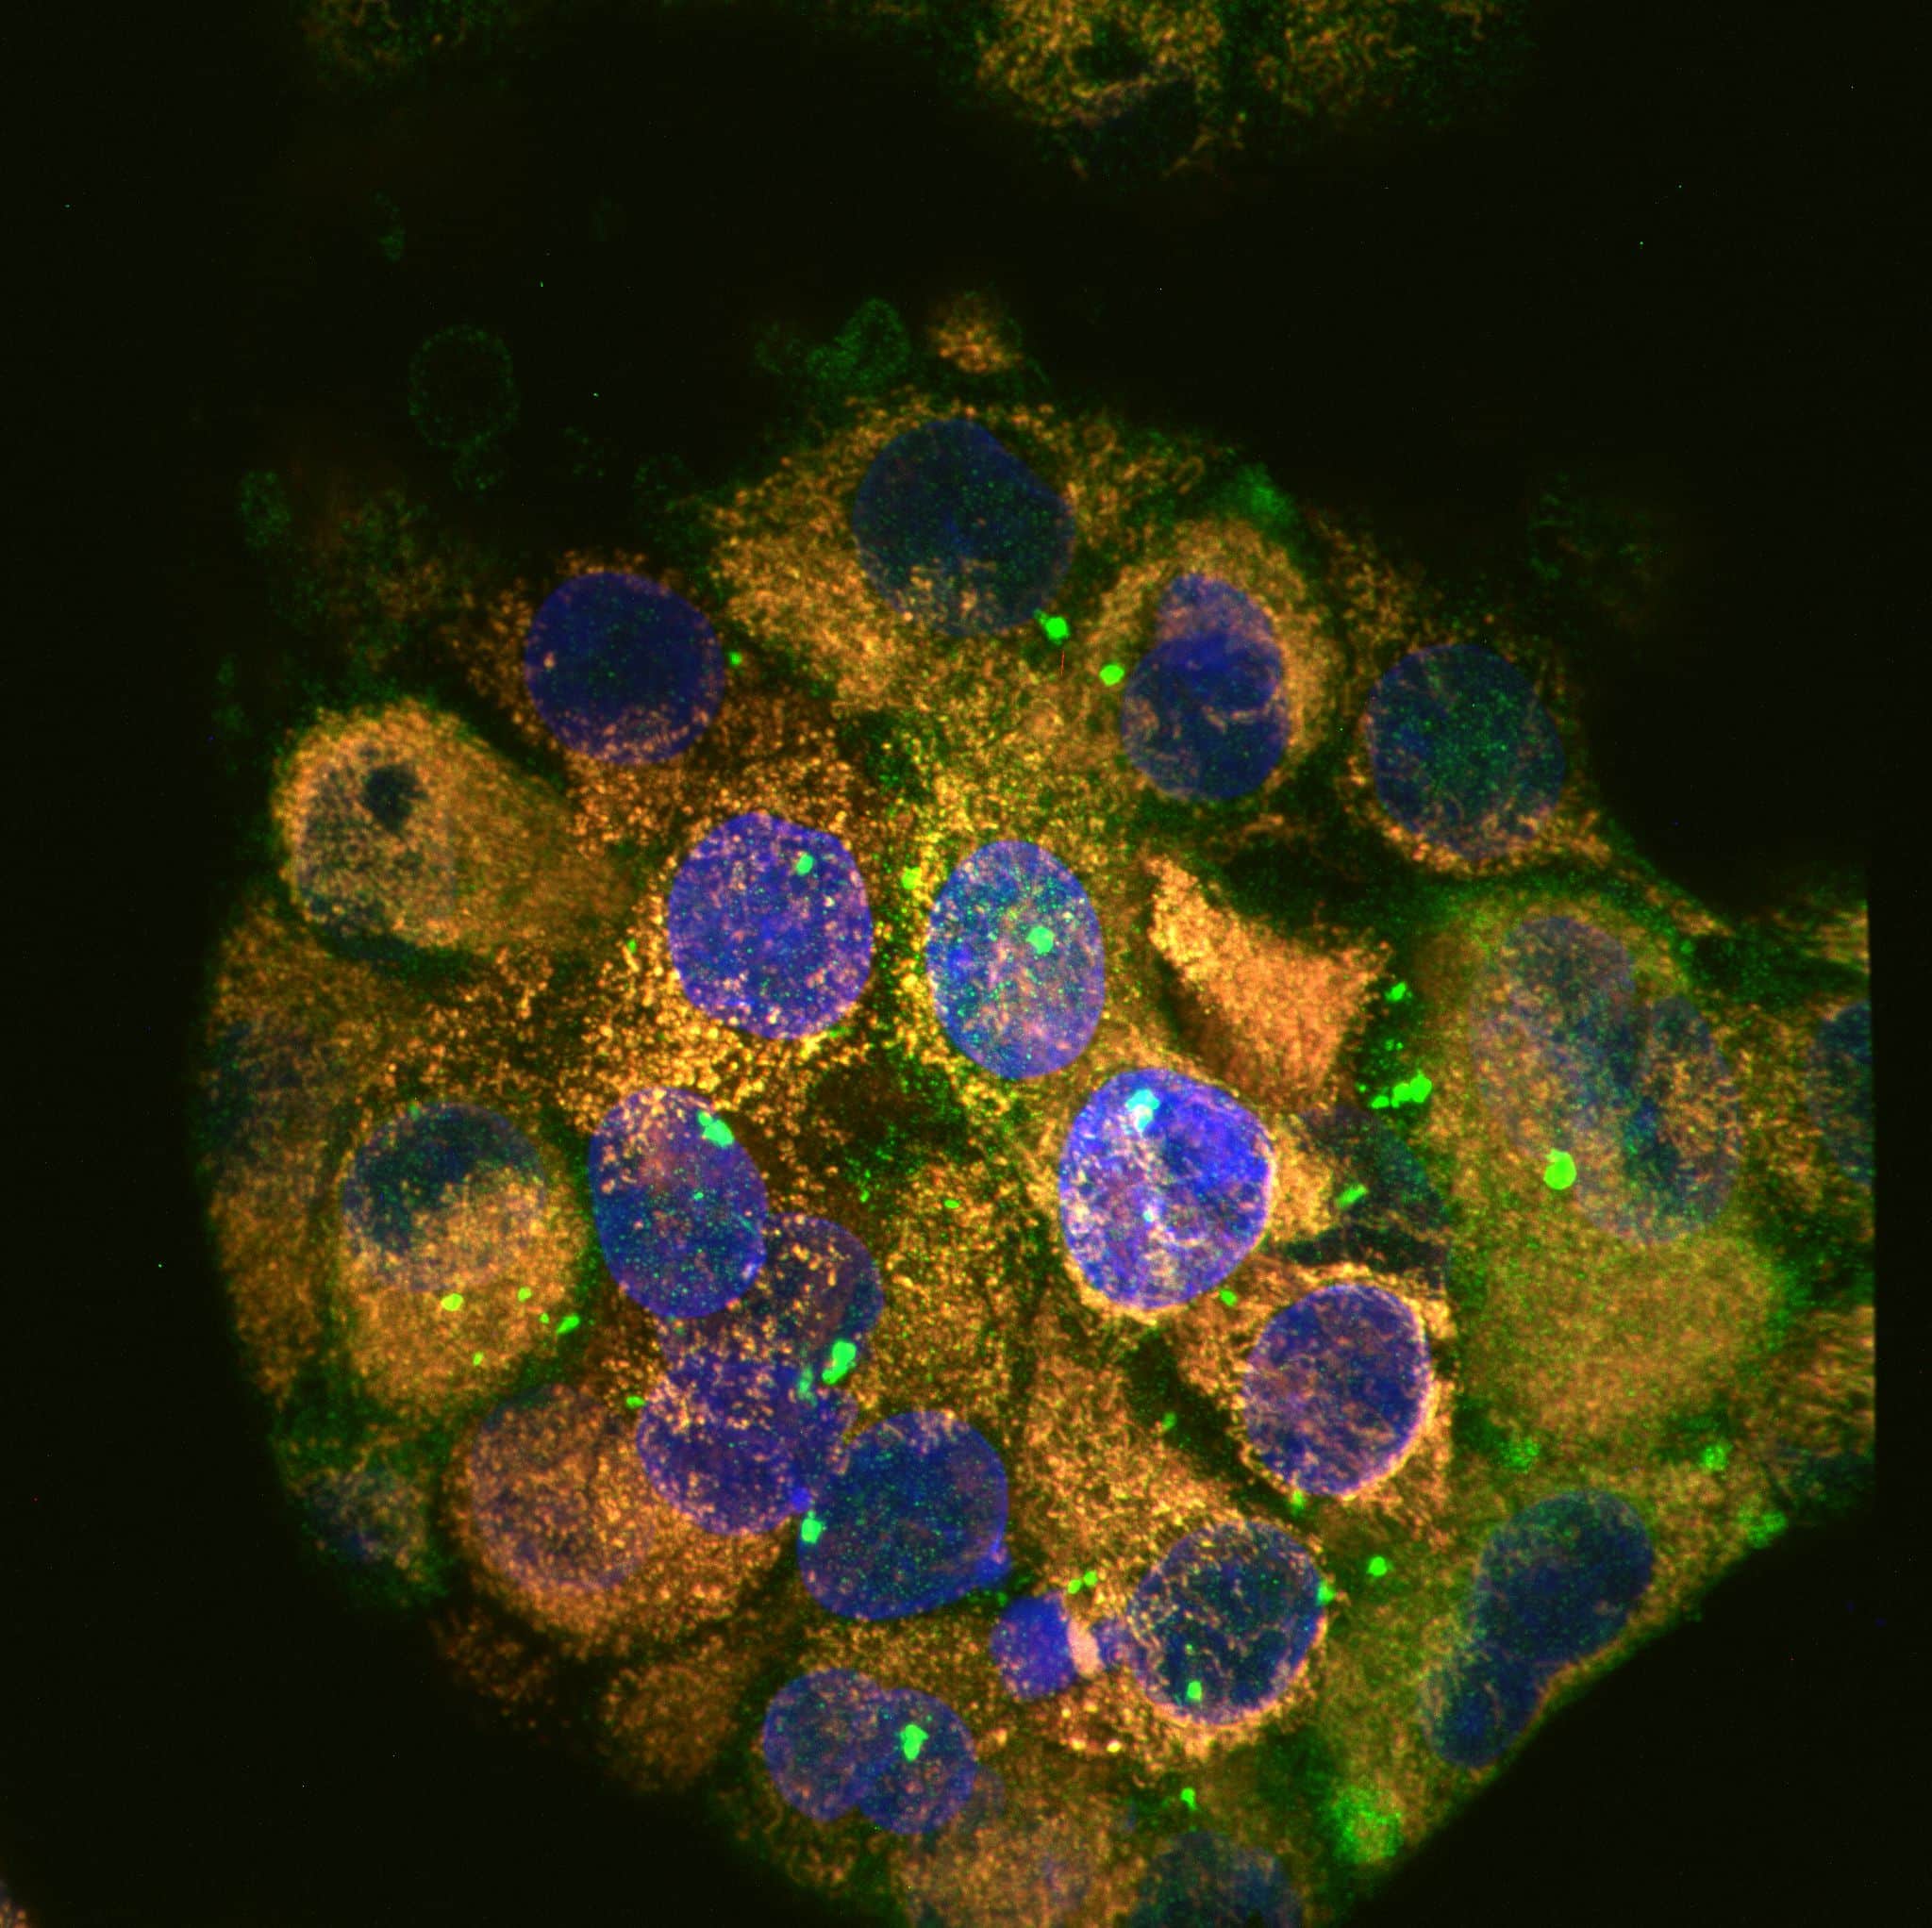 4_Deep Tissue imaging (RCM1) Organoid 3D_R-Pedley_Wellcome trust center cell research